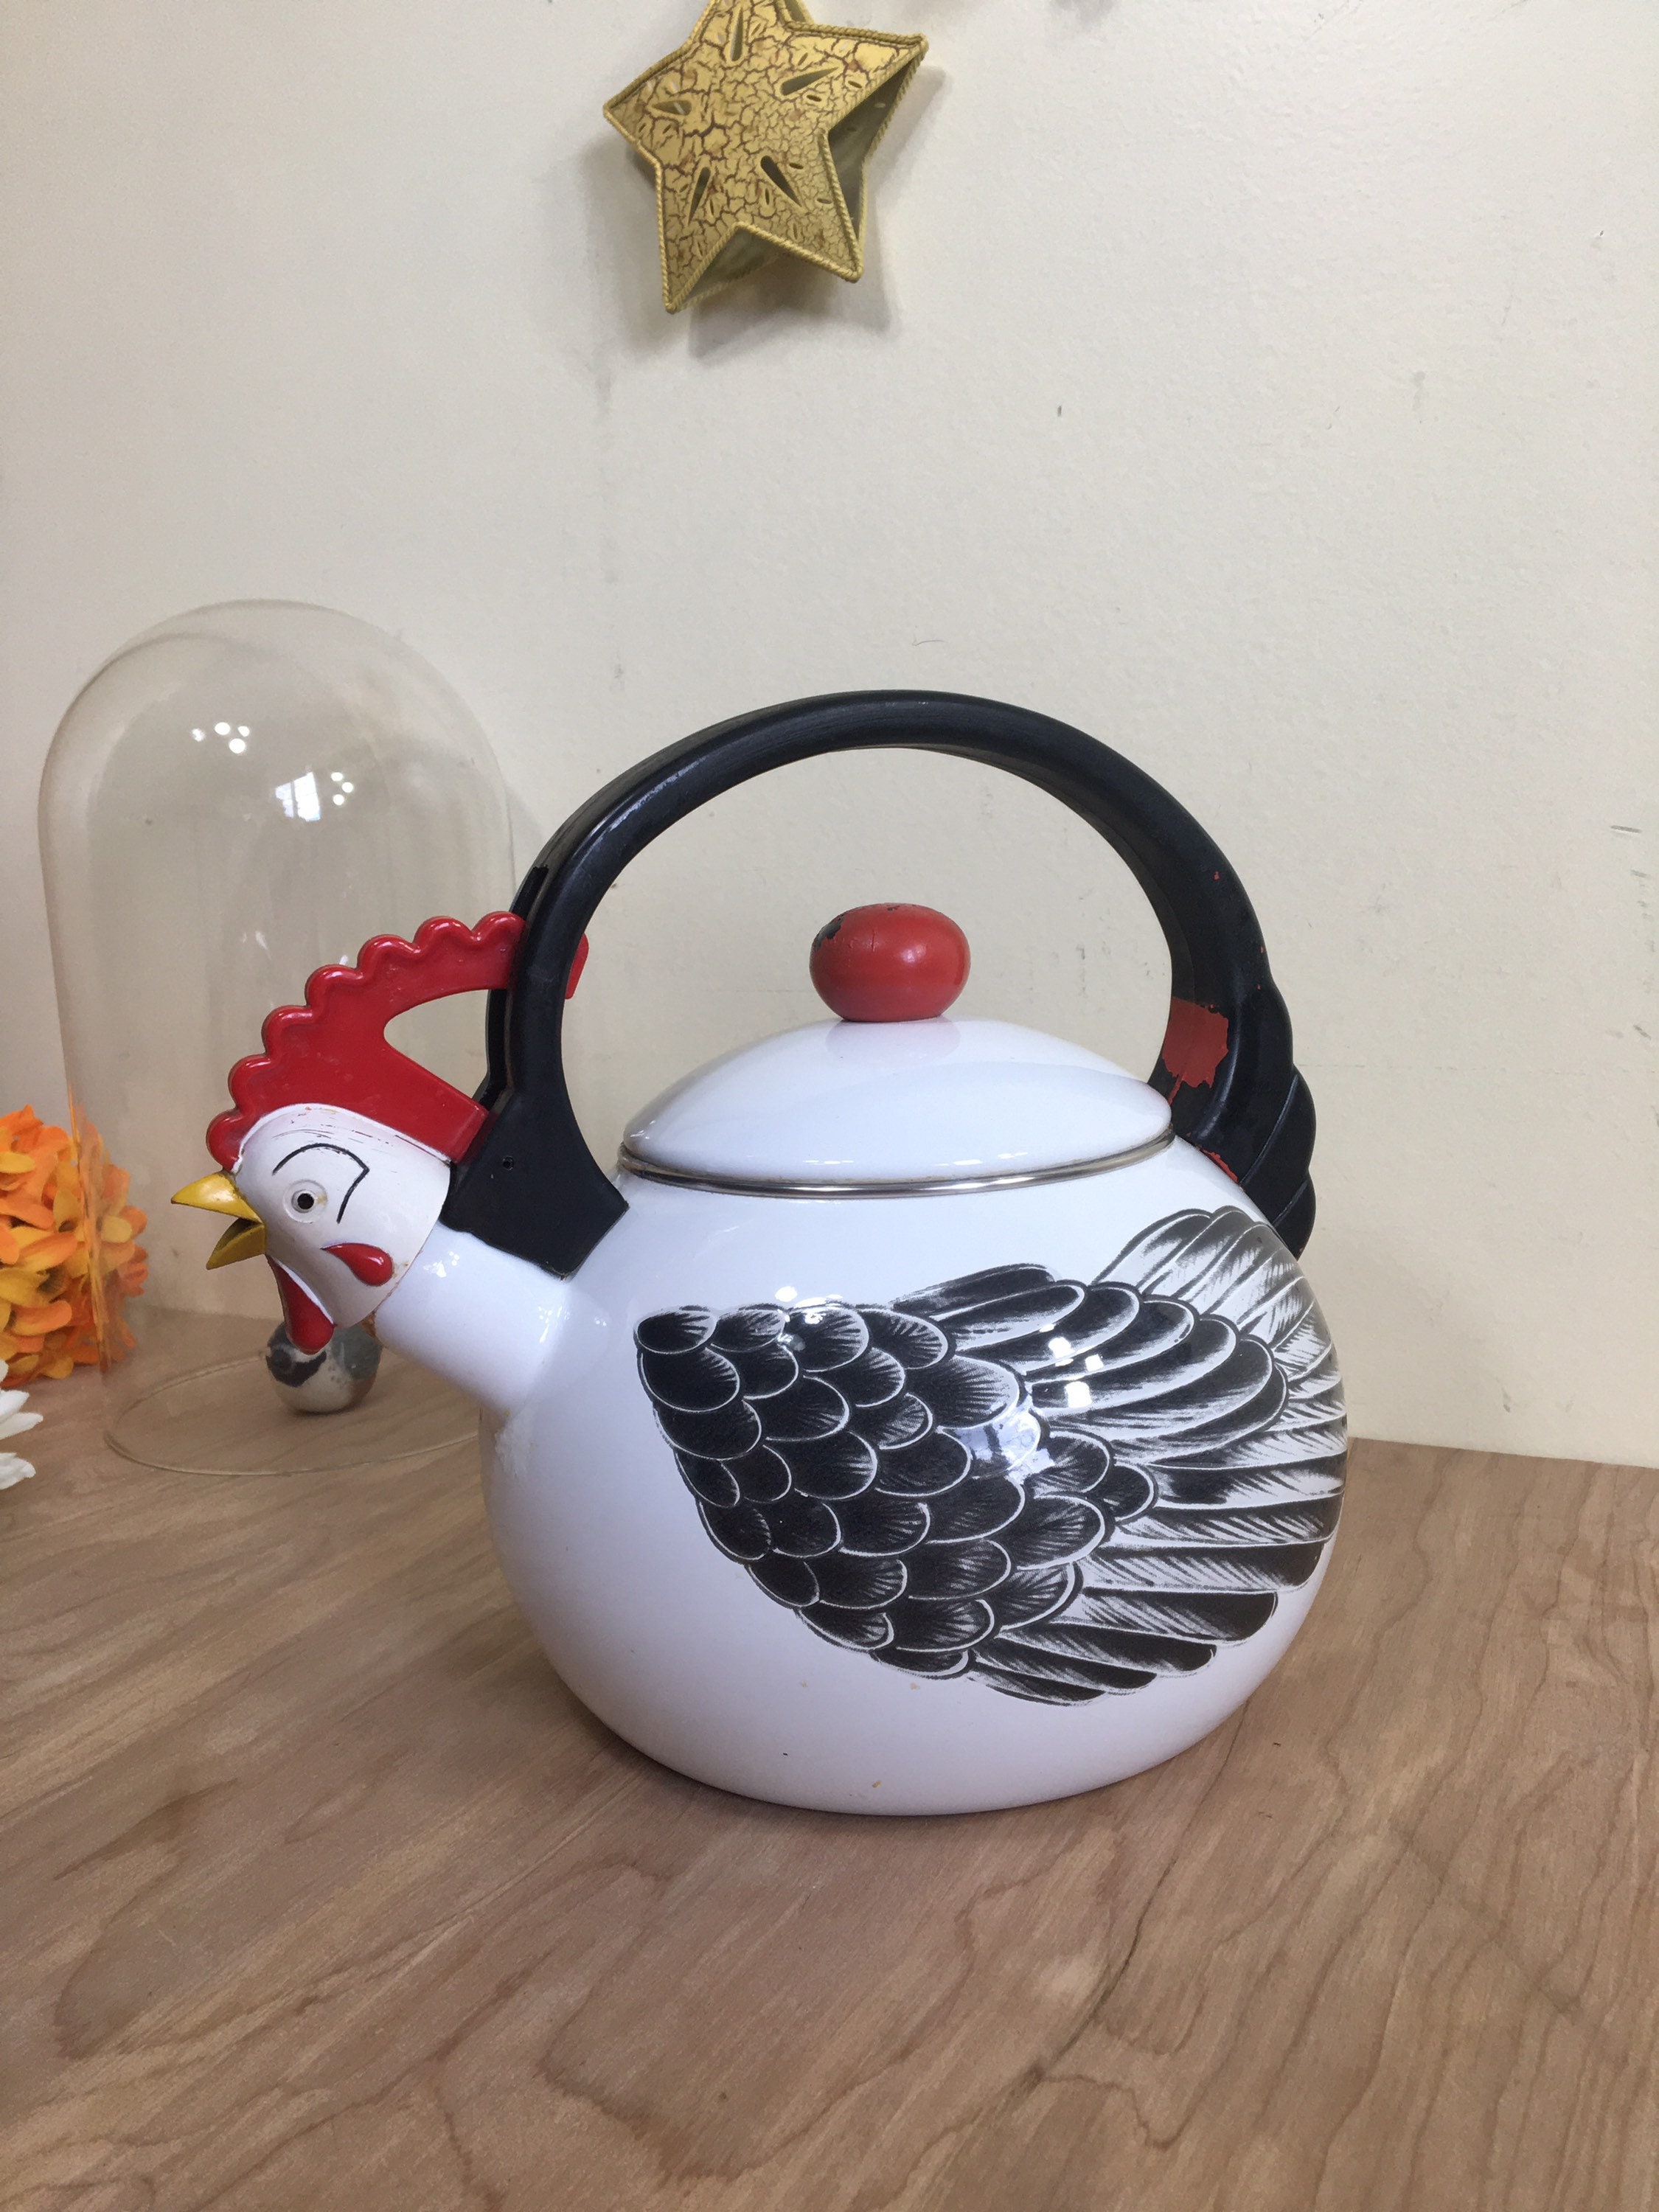 MOO COW TEA KETTLE For $2 In Houston, TX